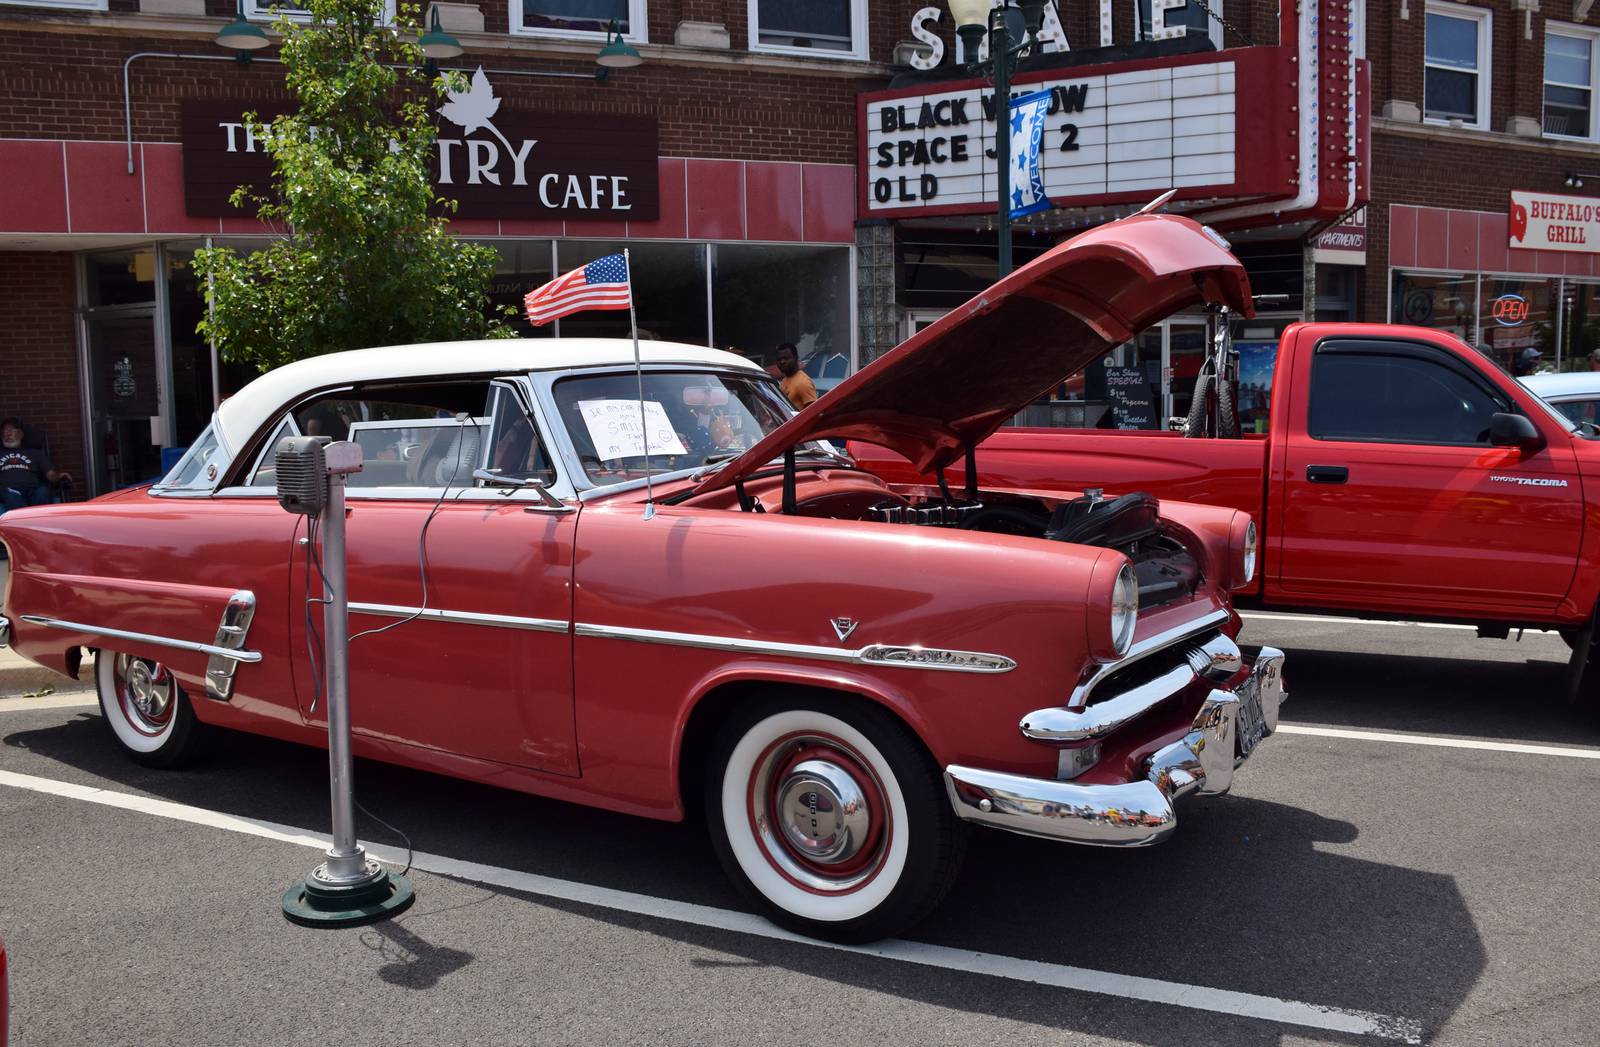 Turning Back Time Car Show returns to Sycamore Shaw Local